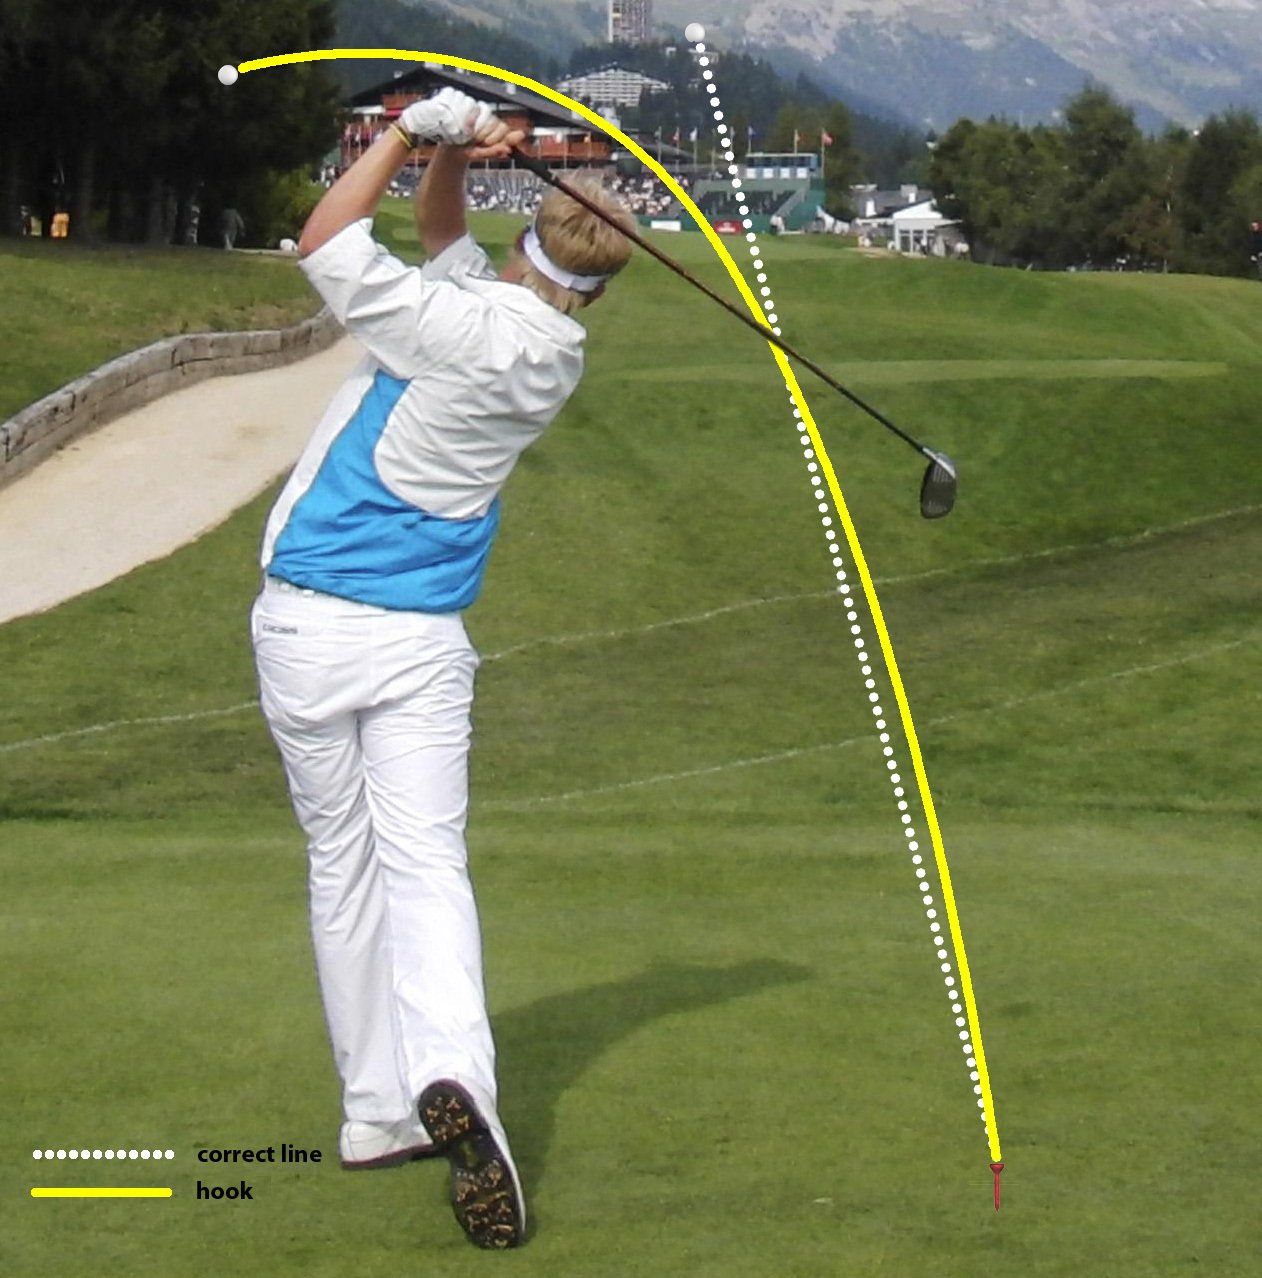 A man swinging a golf club on a golf course with a correct line shown